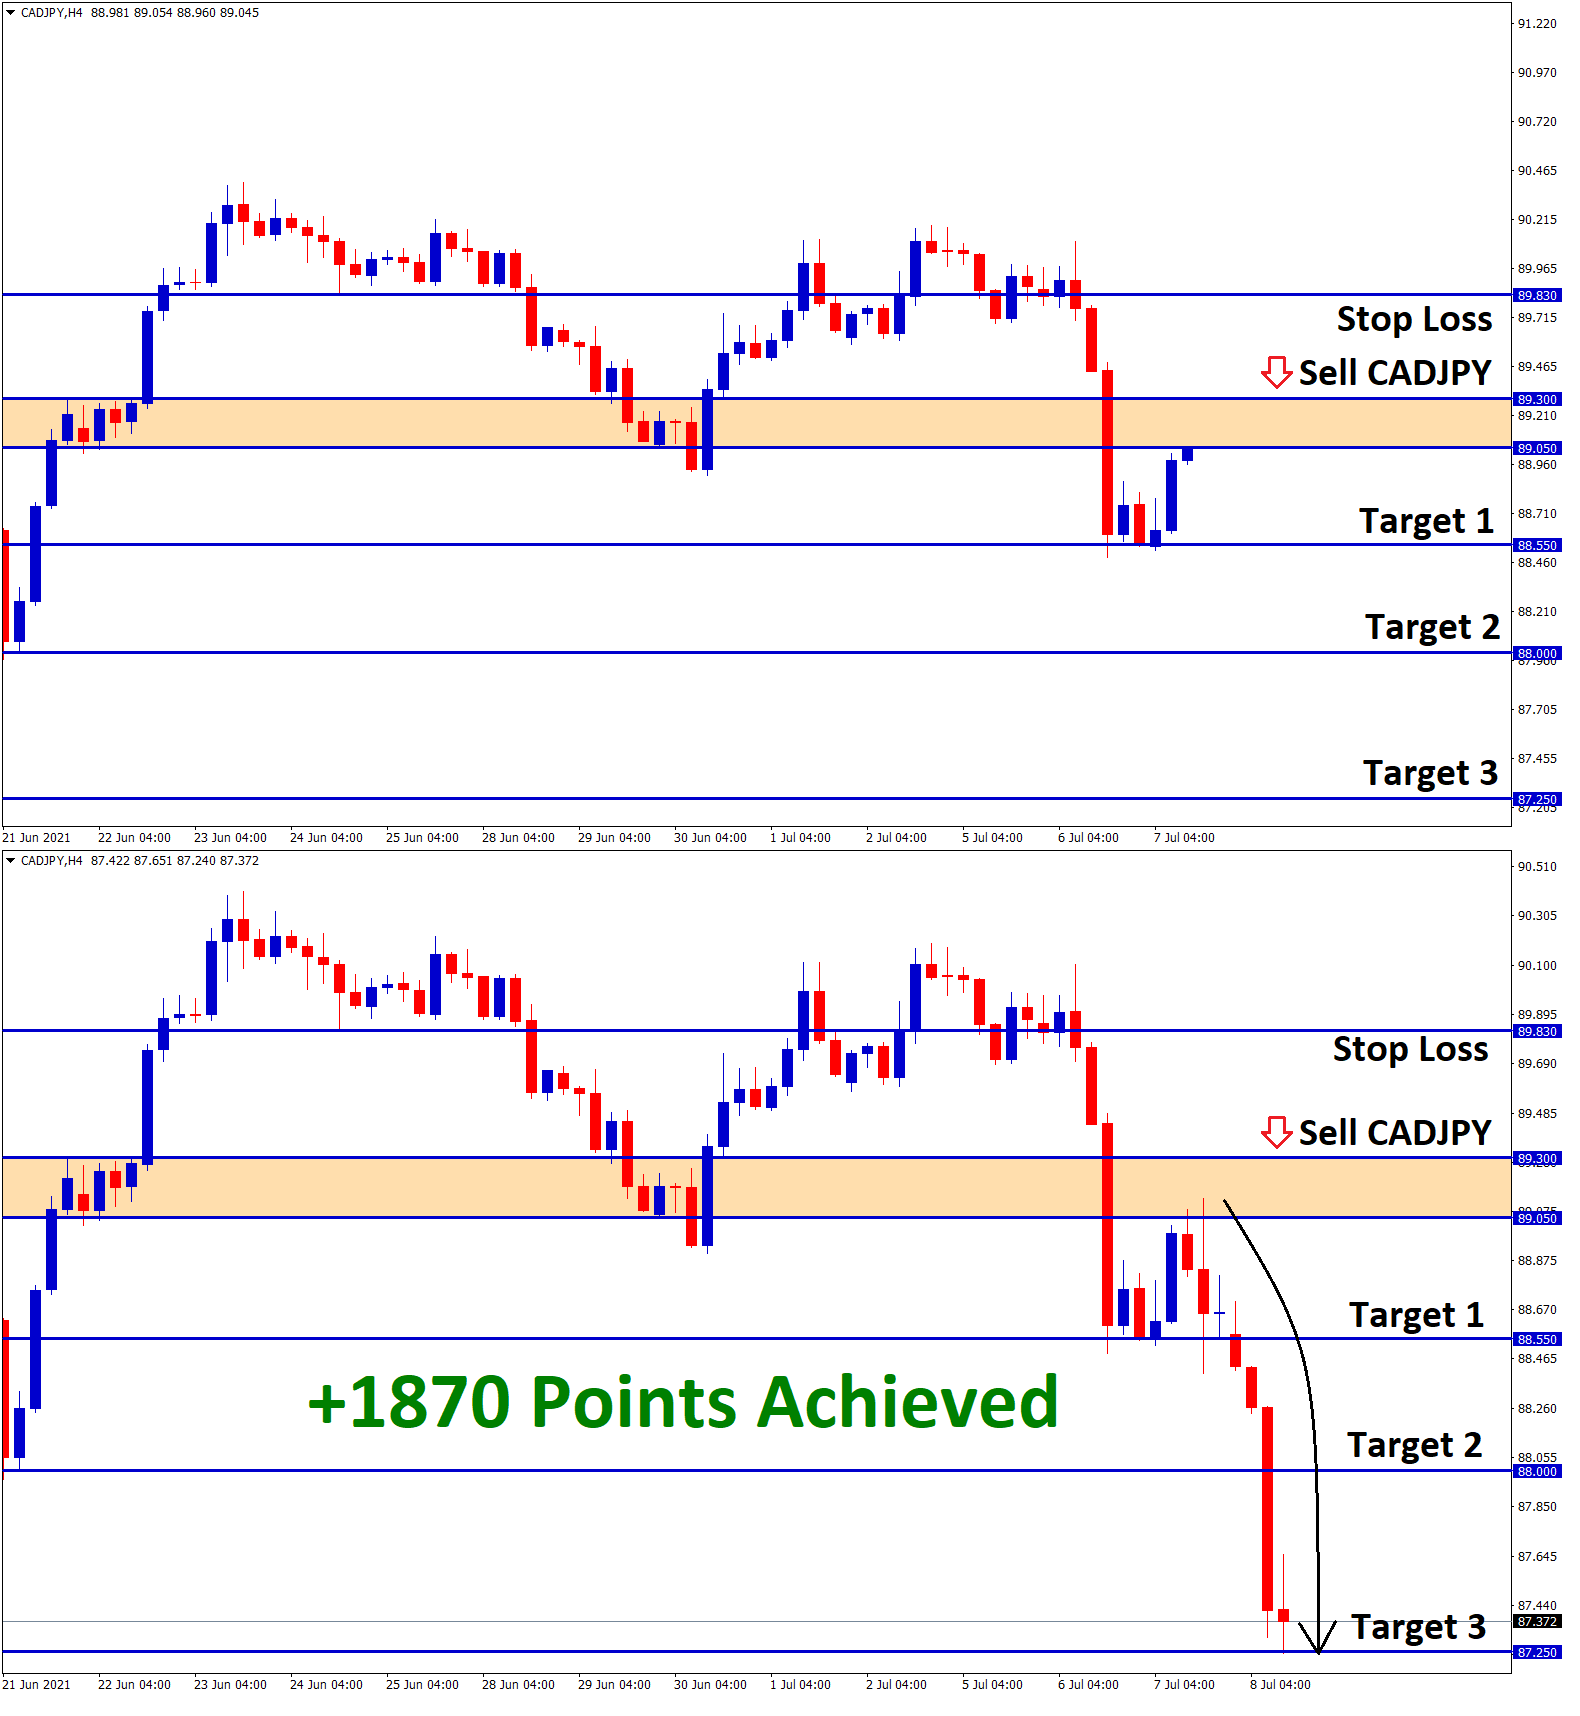 1870 points achived in the CADJPY